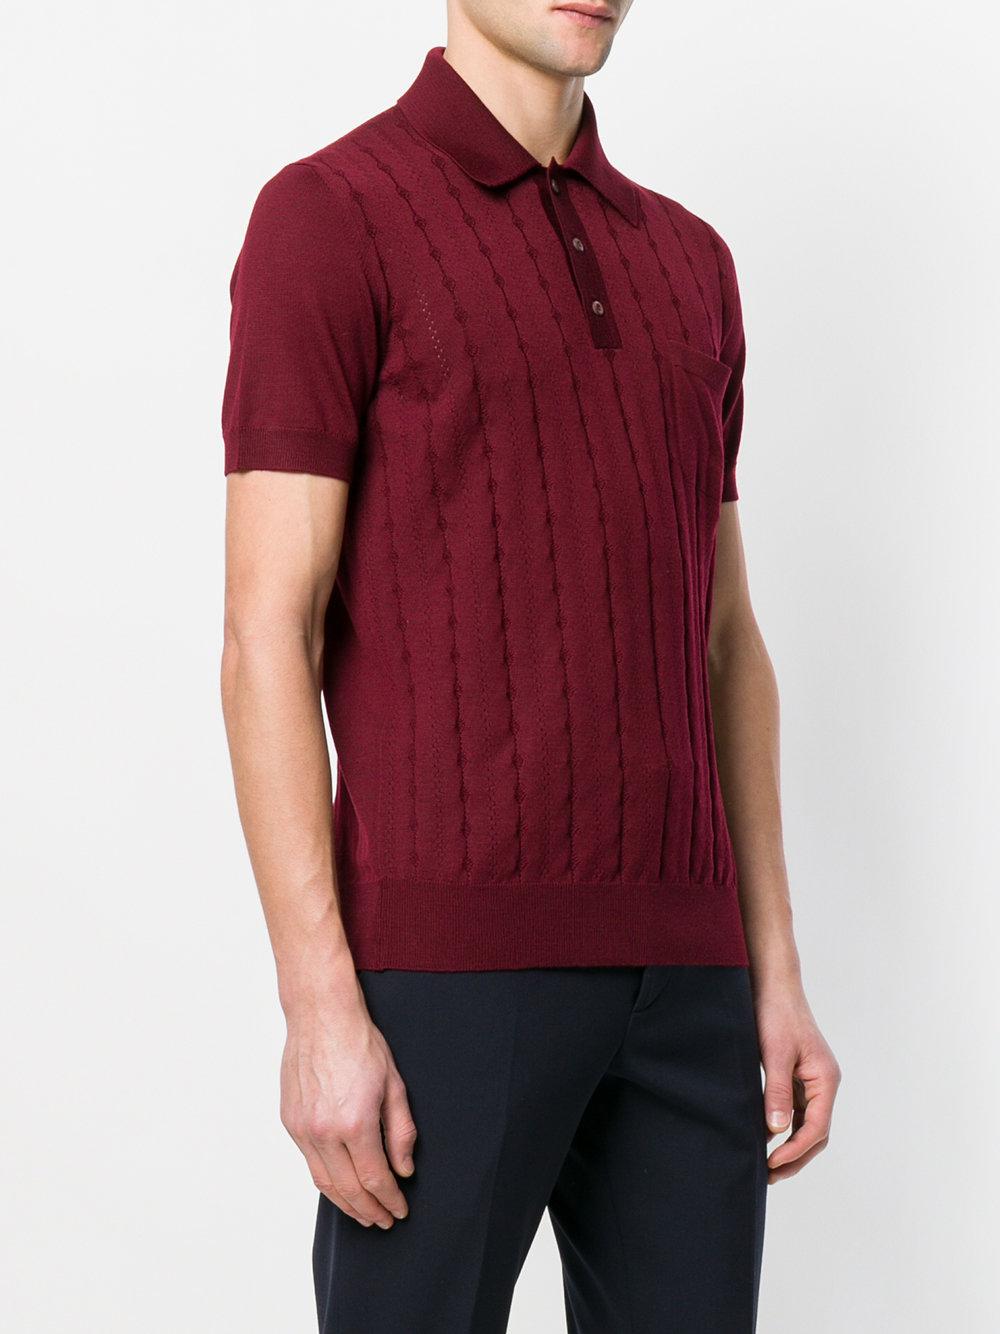 Prada Wool Cable Knit Polo Shirt in Red for Men - Lyst